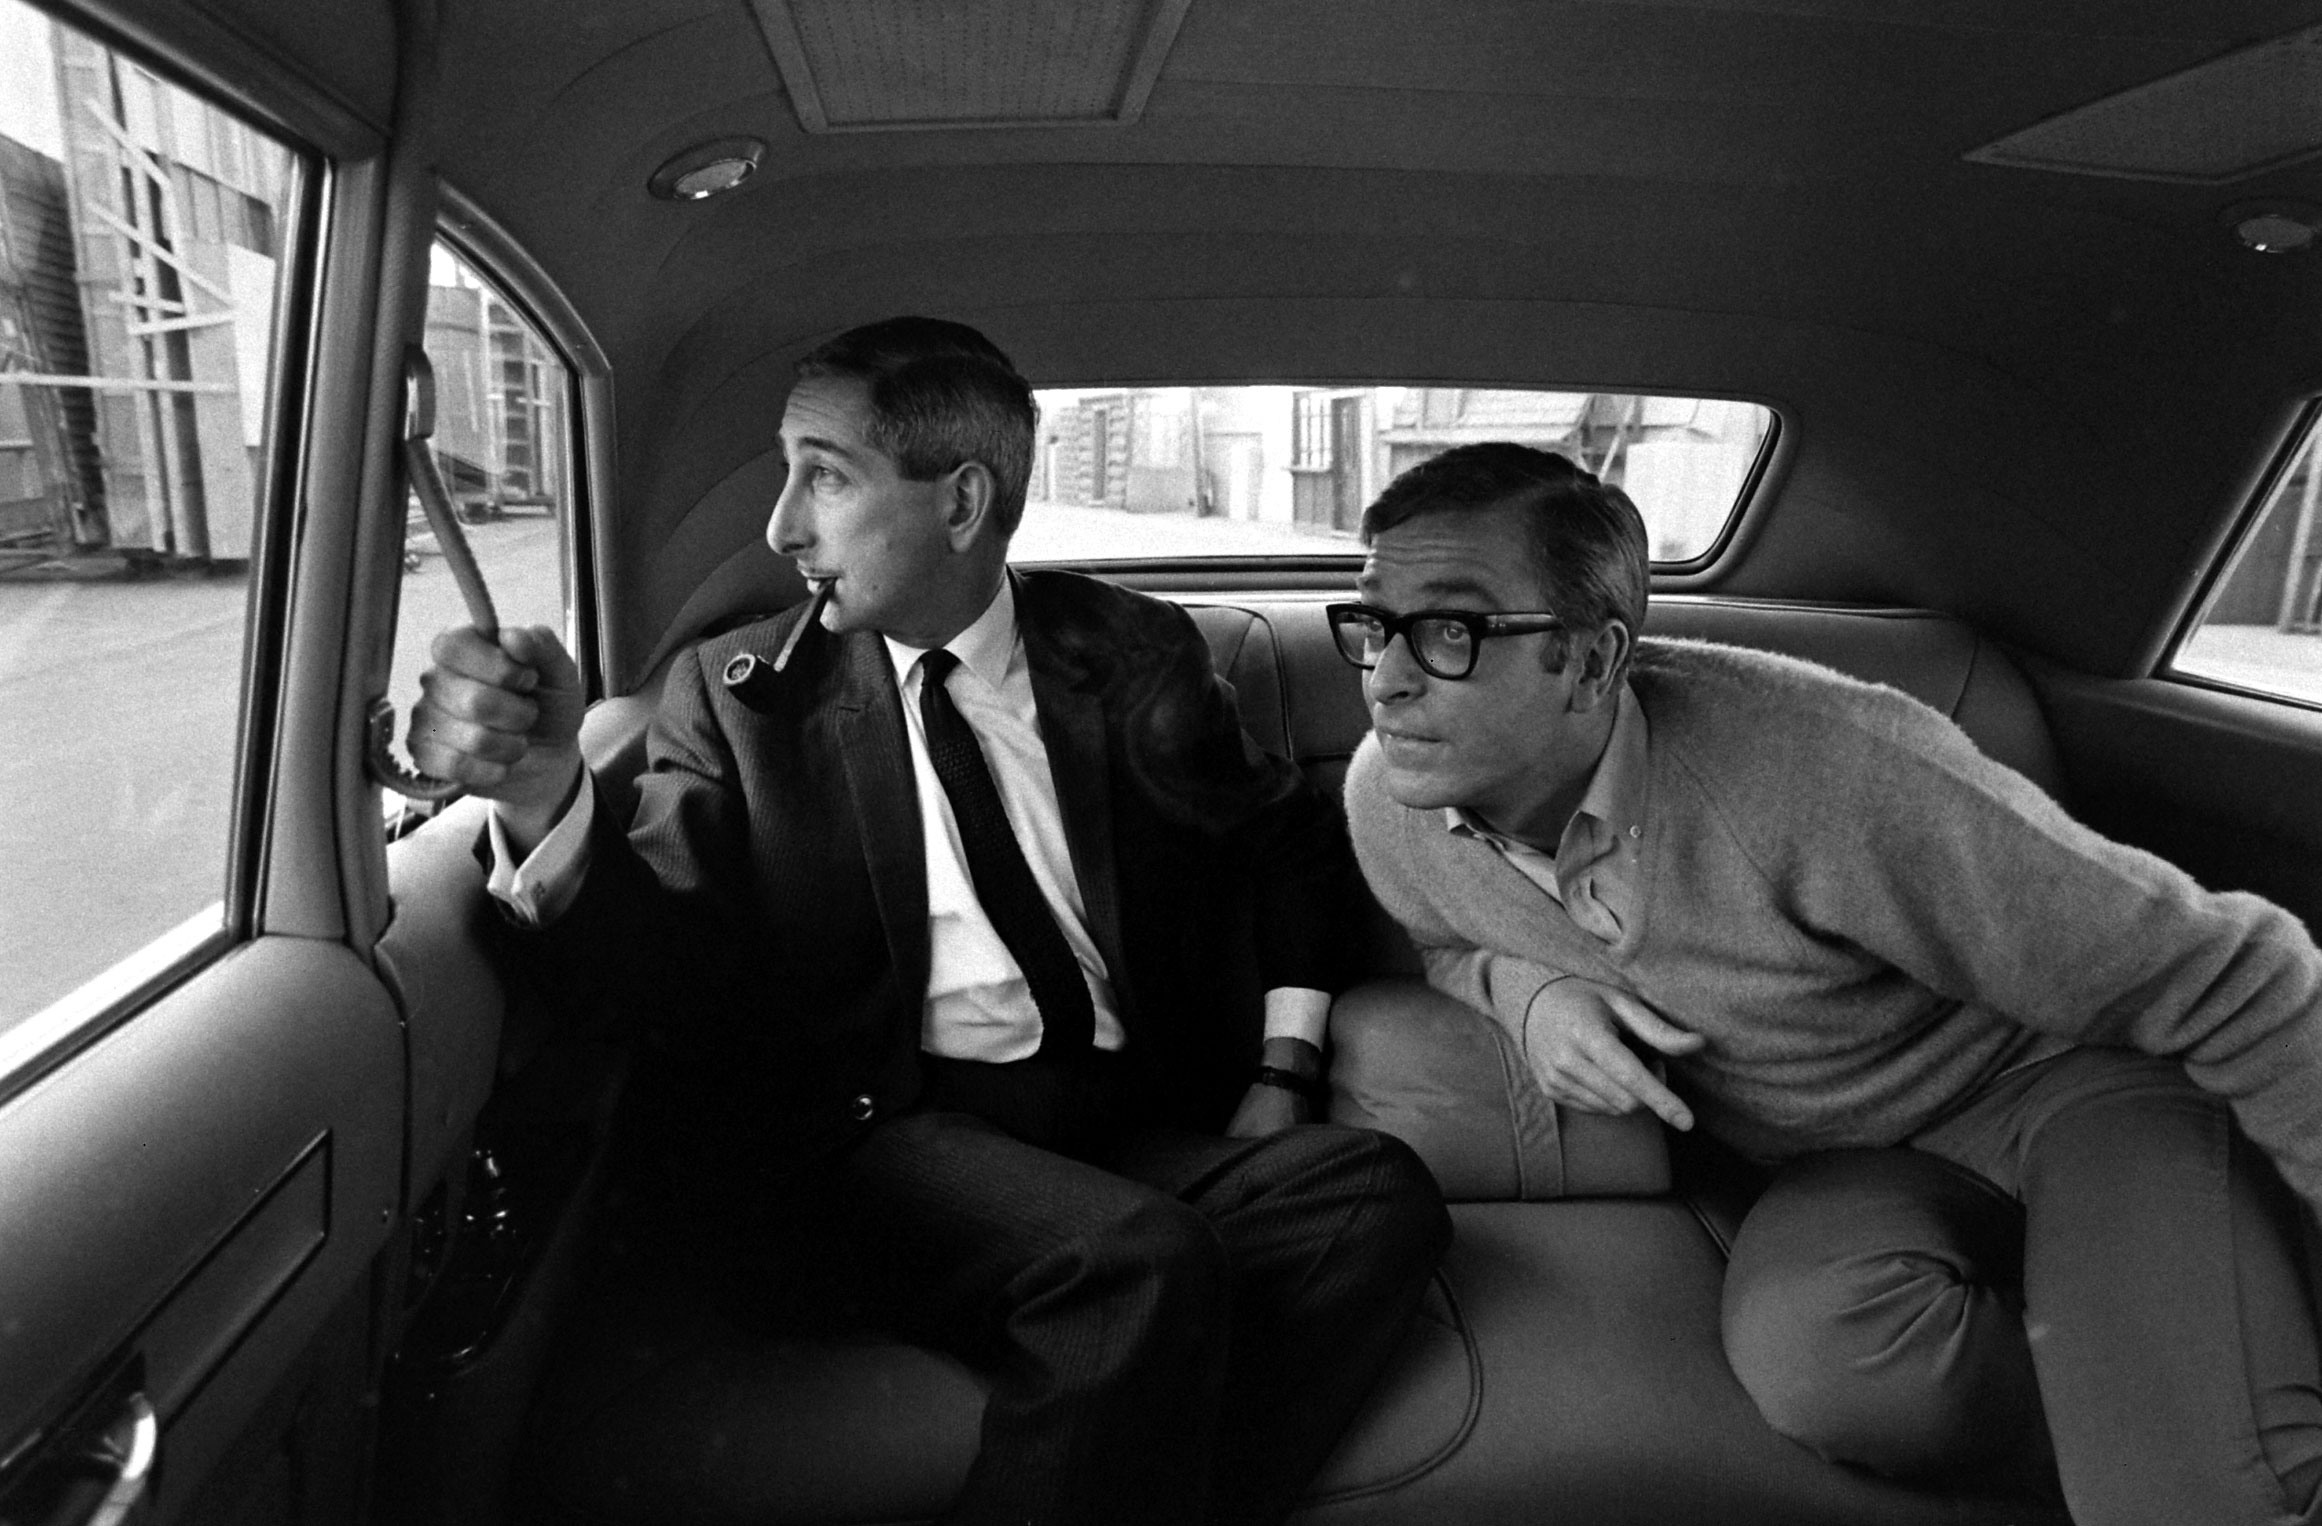 Michael Caine and an unidentified man in a car in Los Angeles in 1966.